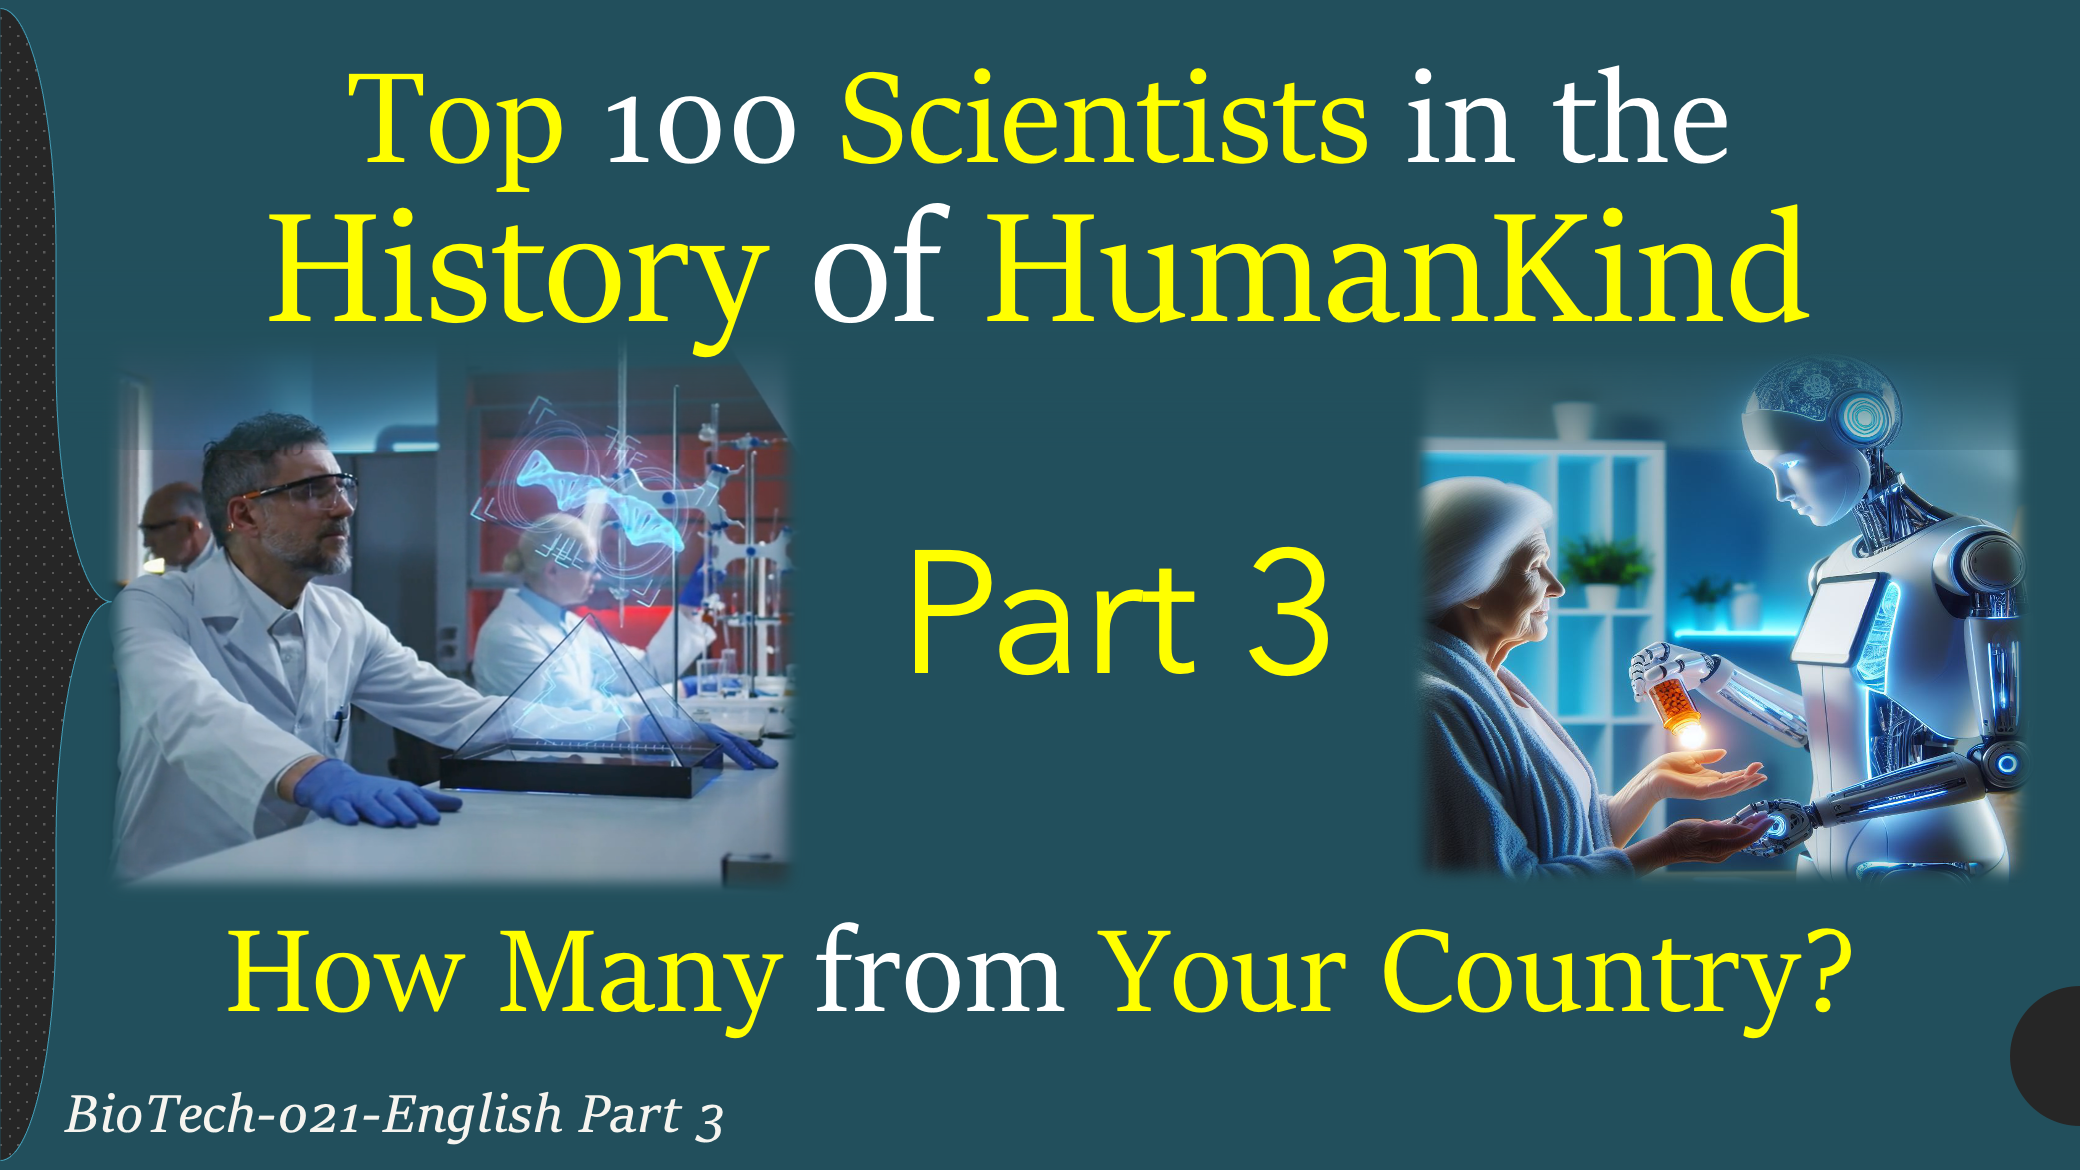 Top 100 Scientists in the History of Humankind (Part 3)